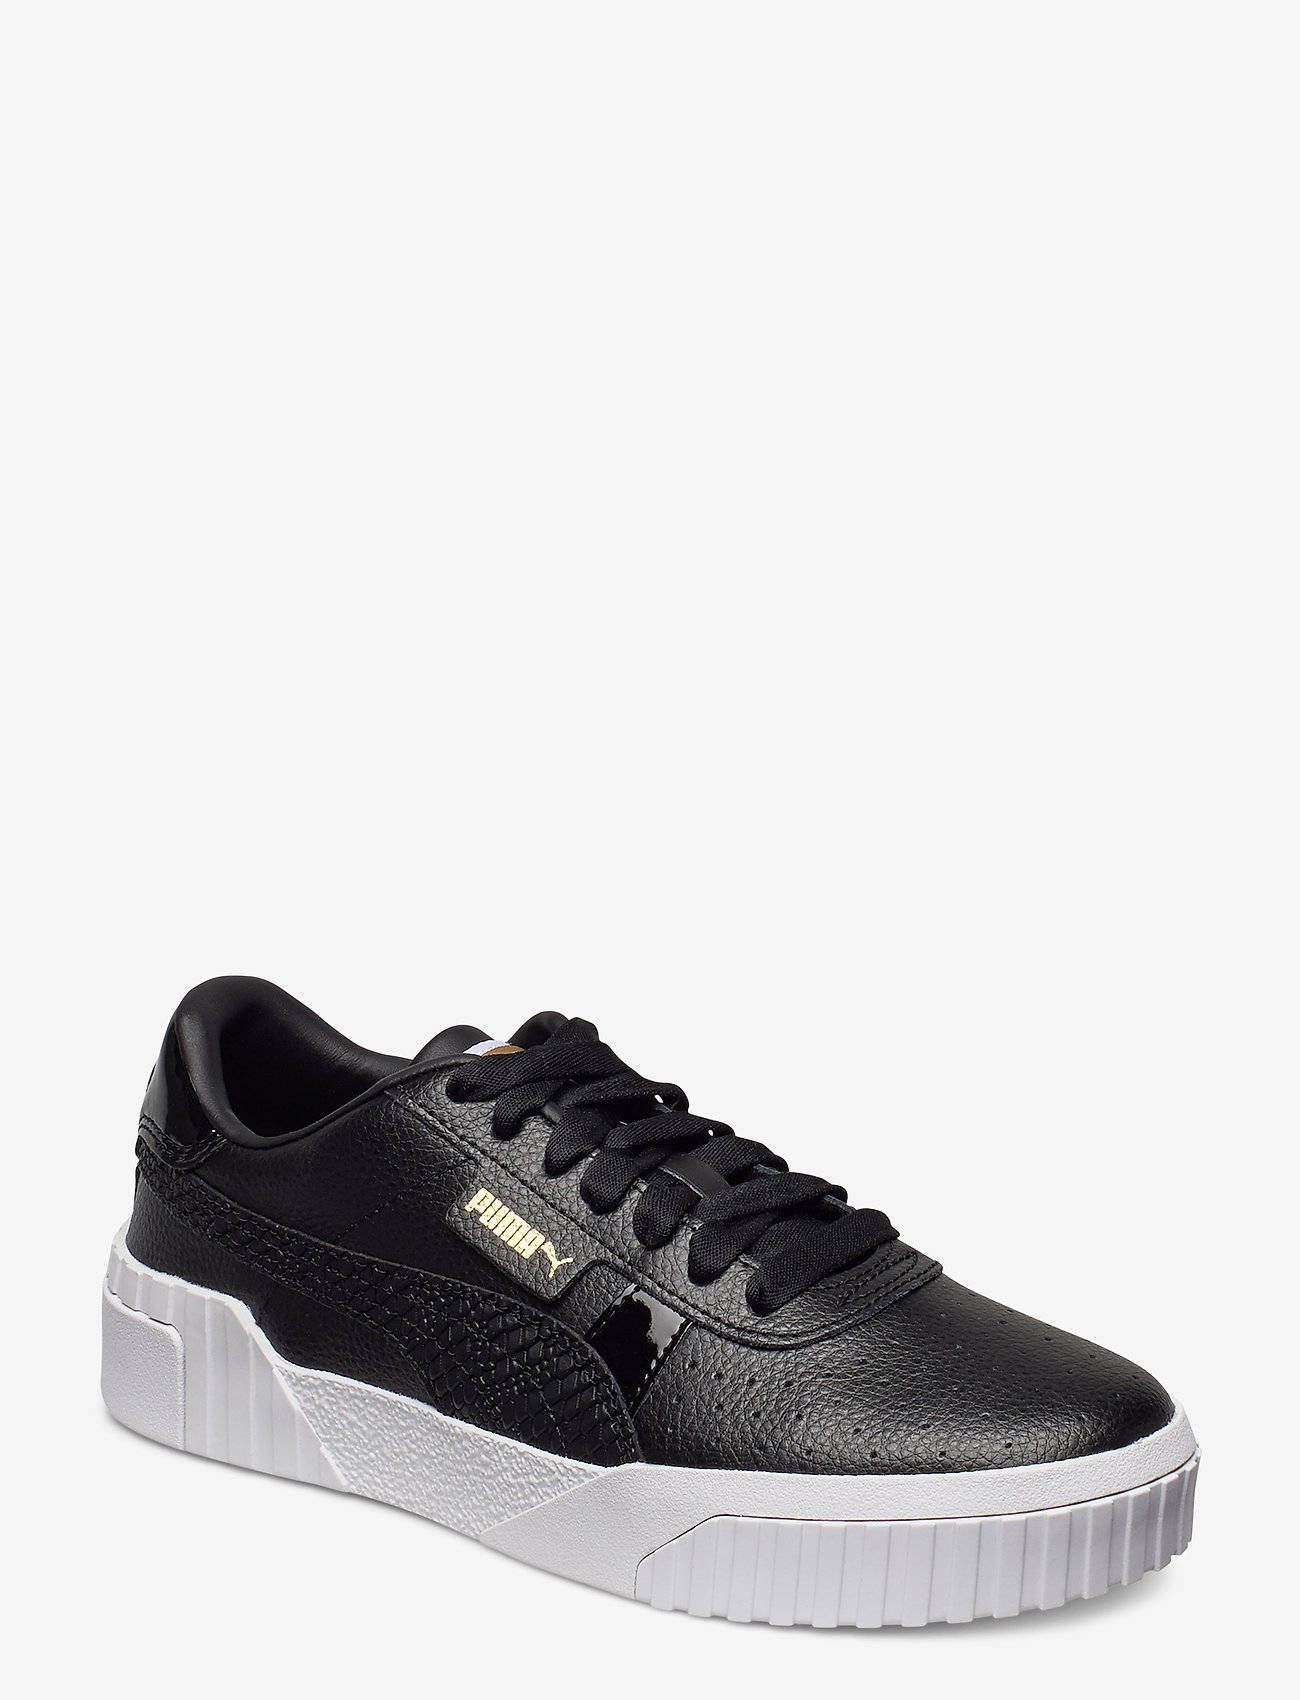 puma shoes black and gold